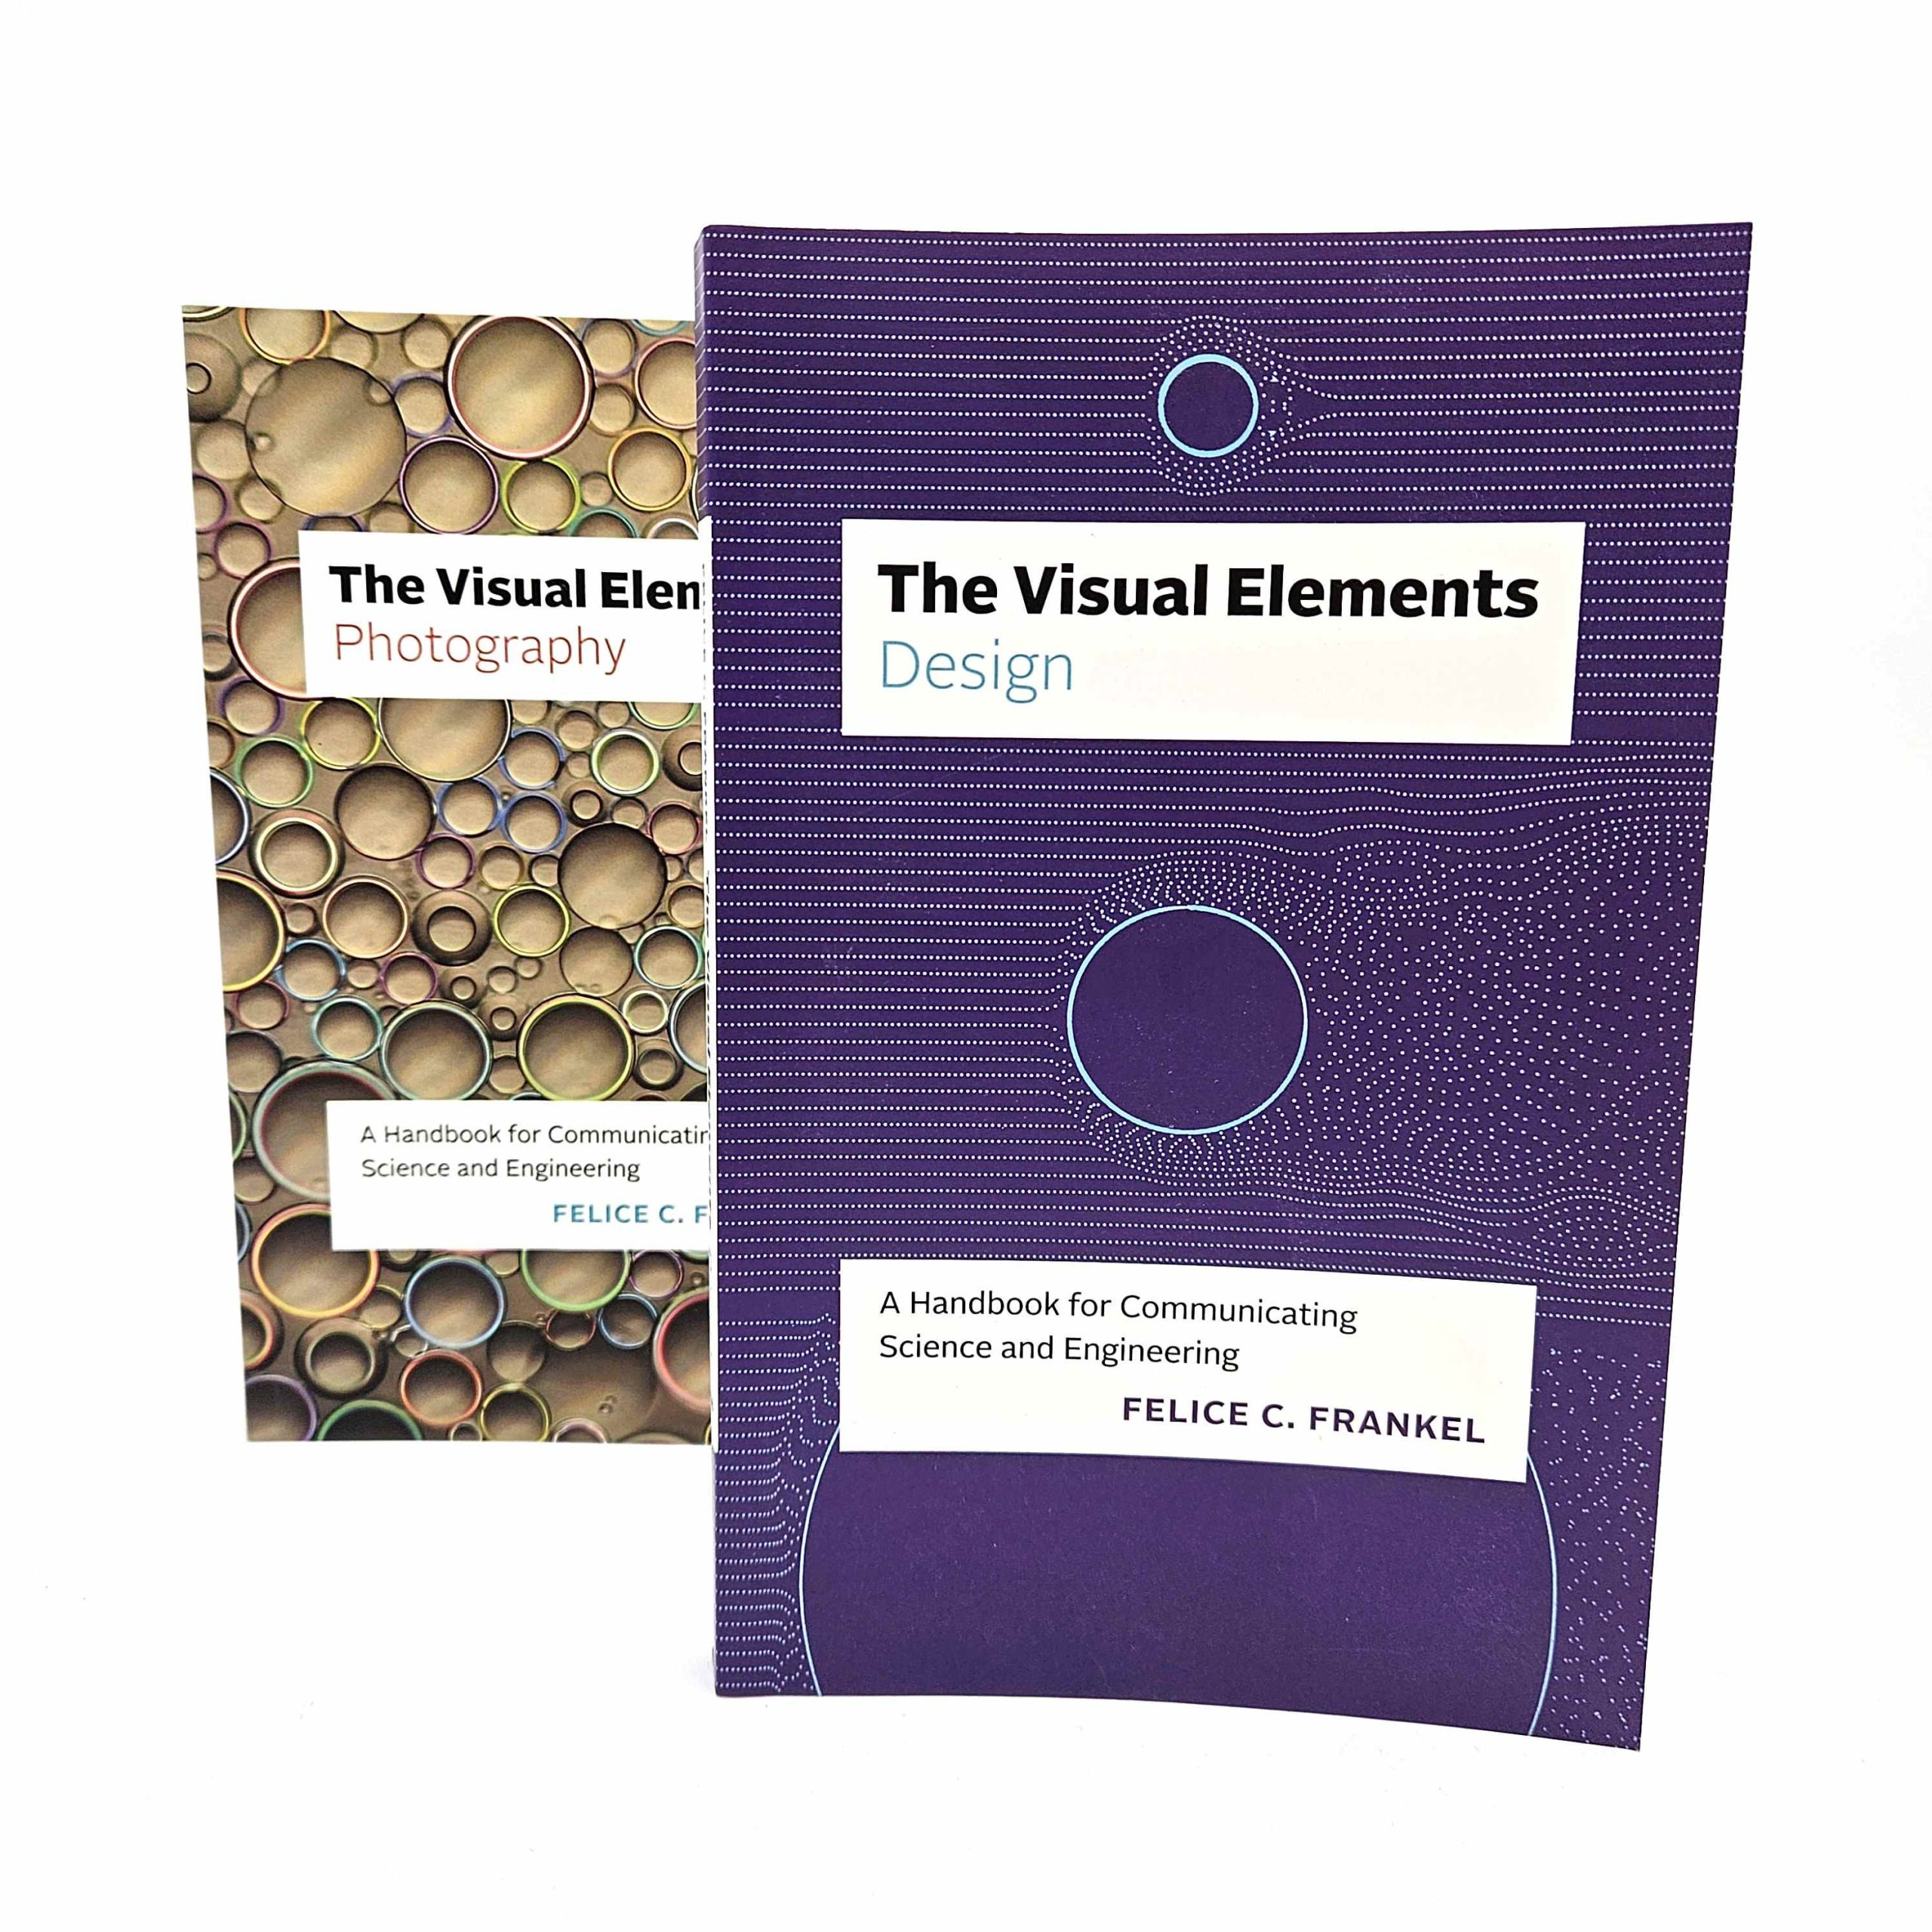 Six Questions with Felice C. Frankel, author of the Visual Elements series